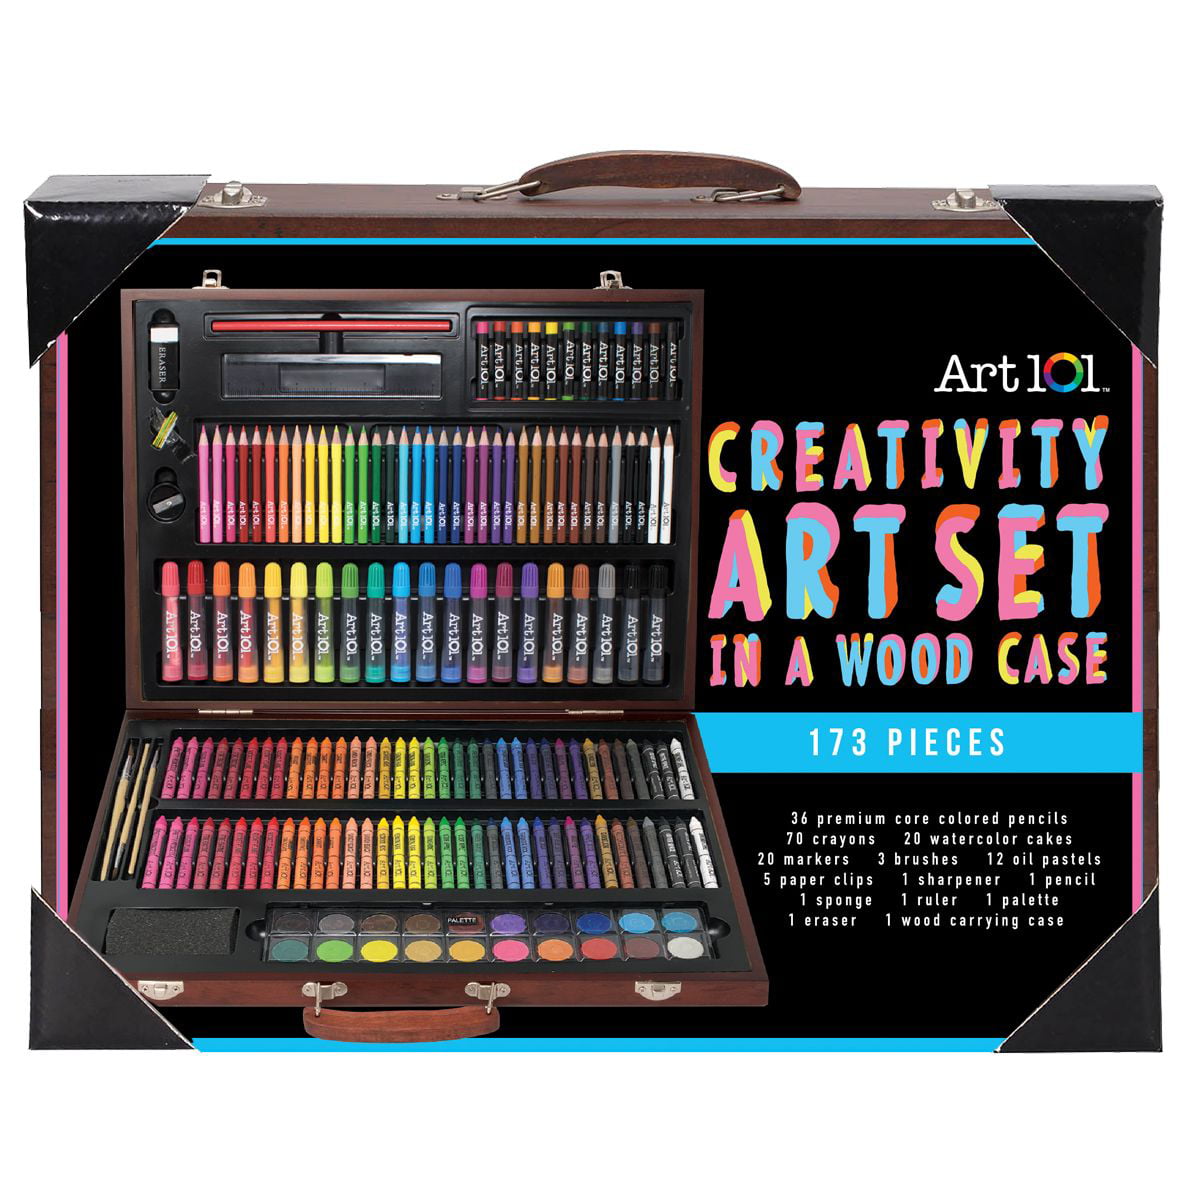 Art 101 Deluxe Art Set With 119 Pieces In A Wood Organizer Case - Walmart.com